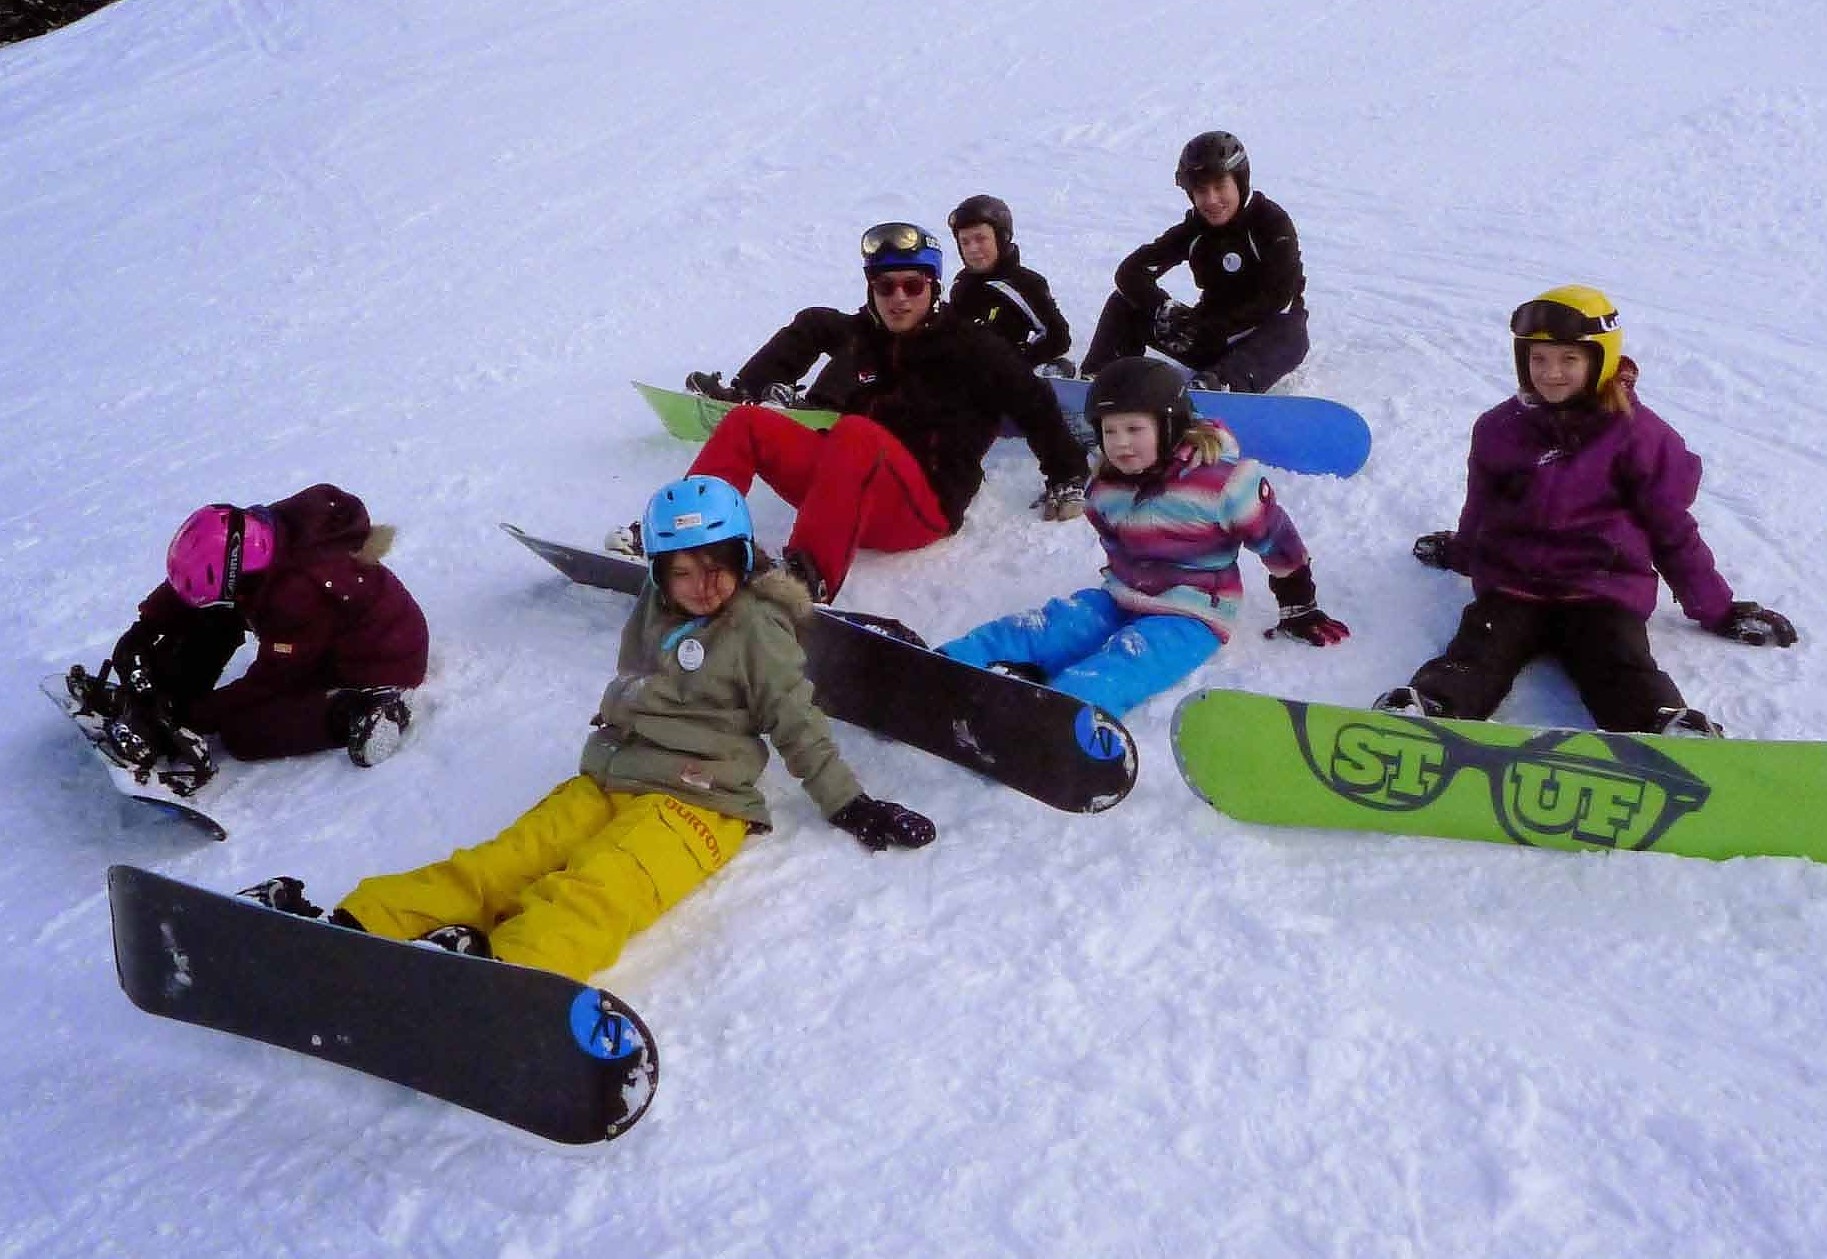 Group BEGINNER Snowboard-lessons 4 hours FULLDAY from 9.30-11.30 a.m., 12.30-2.30 p.m. 